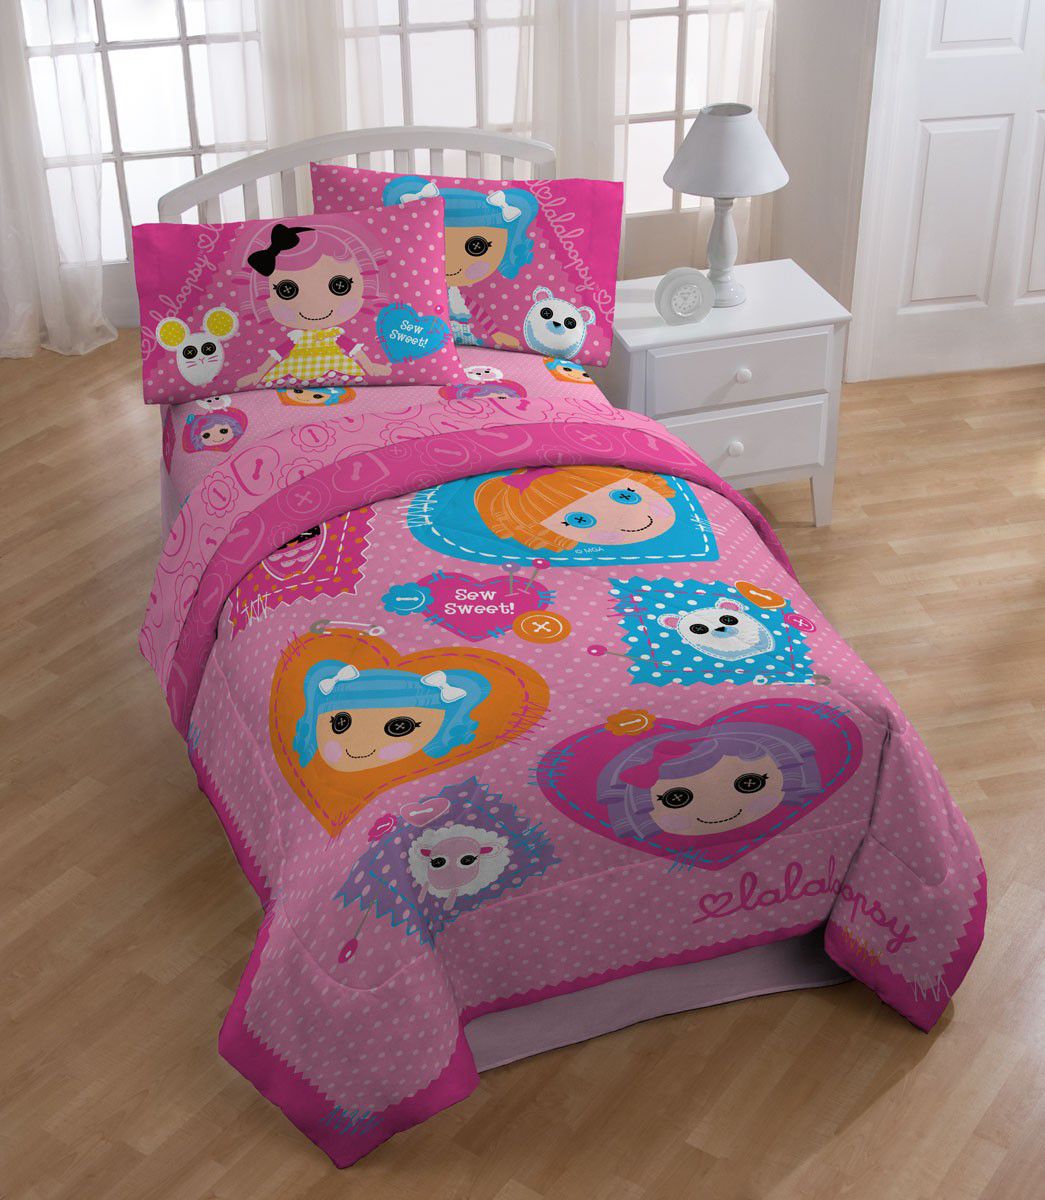 Kids Sheets: Shop for Kids Bedding at Sears